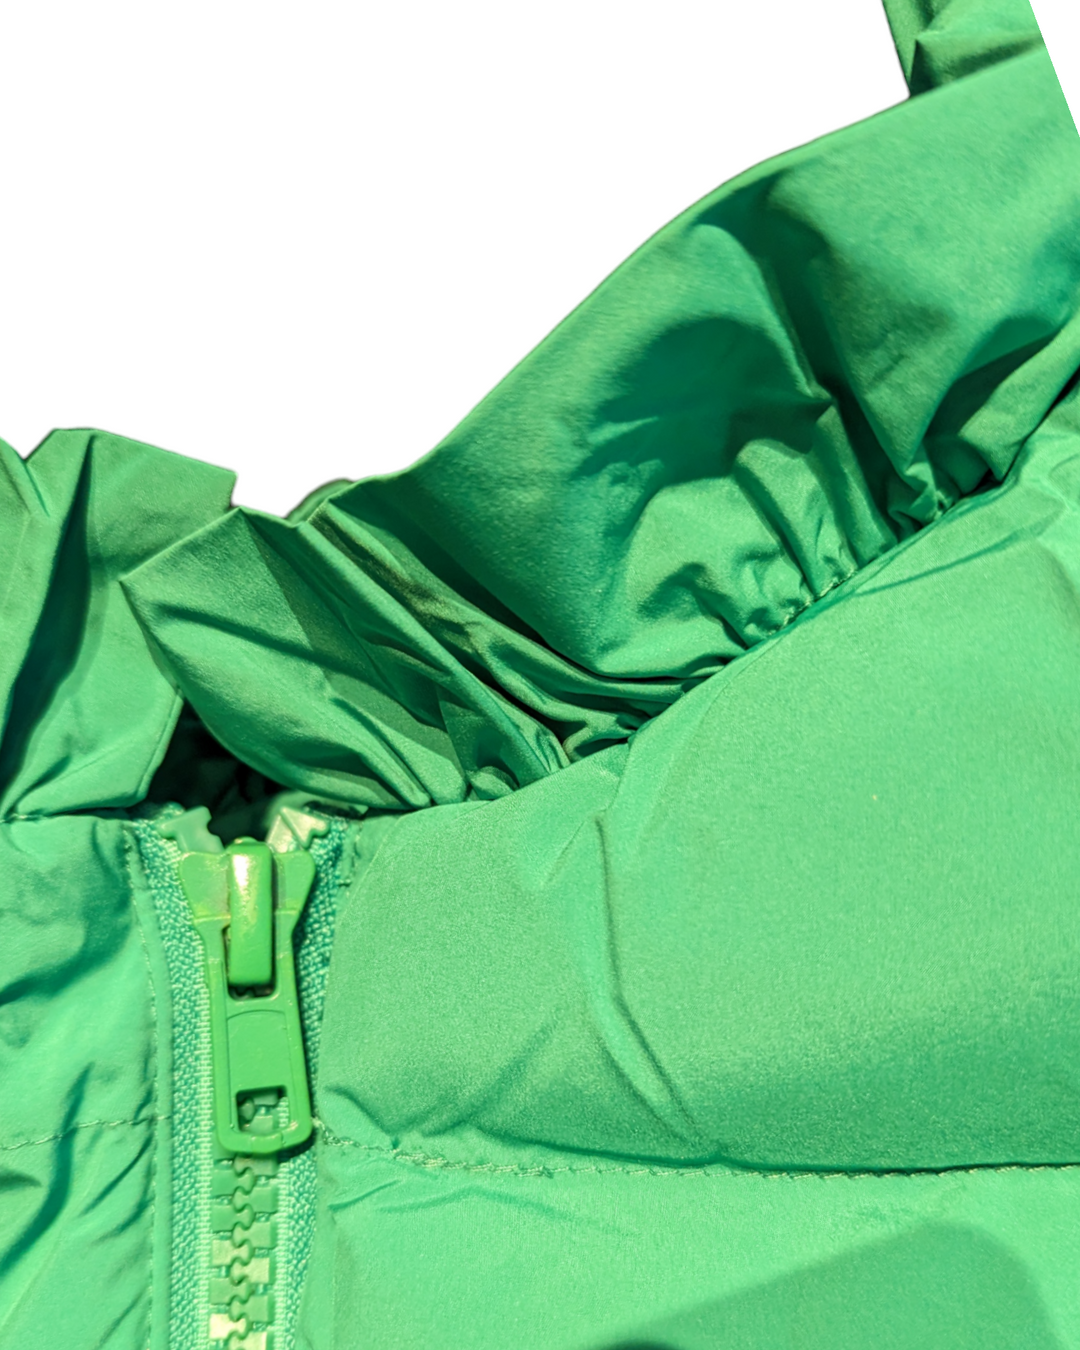 detail view of the zipper closure and ruffle on the neckline of the puffer vest